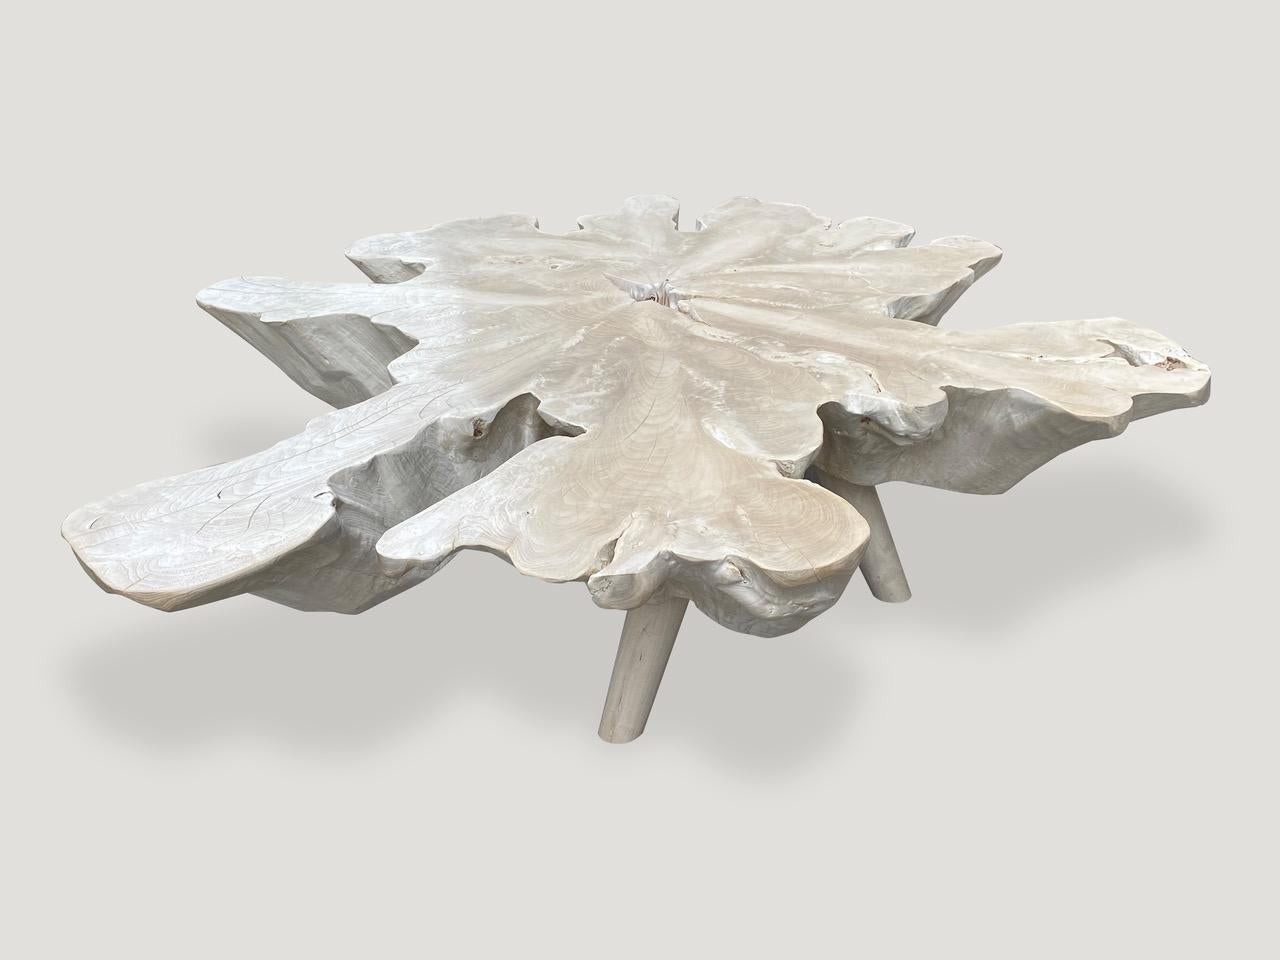 Impressive eight inch single slab reclaimed teak wood coffee table. We bleached the teak and added a shellack to the top for protection. Floating on mid century style legs. Organic with a twist. 

The St. Barts Collection features an exciting new